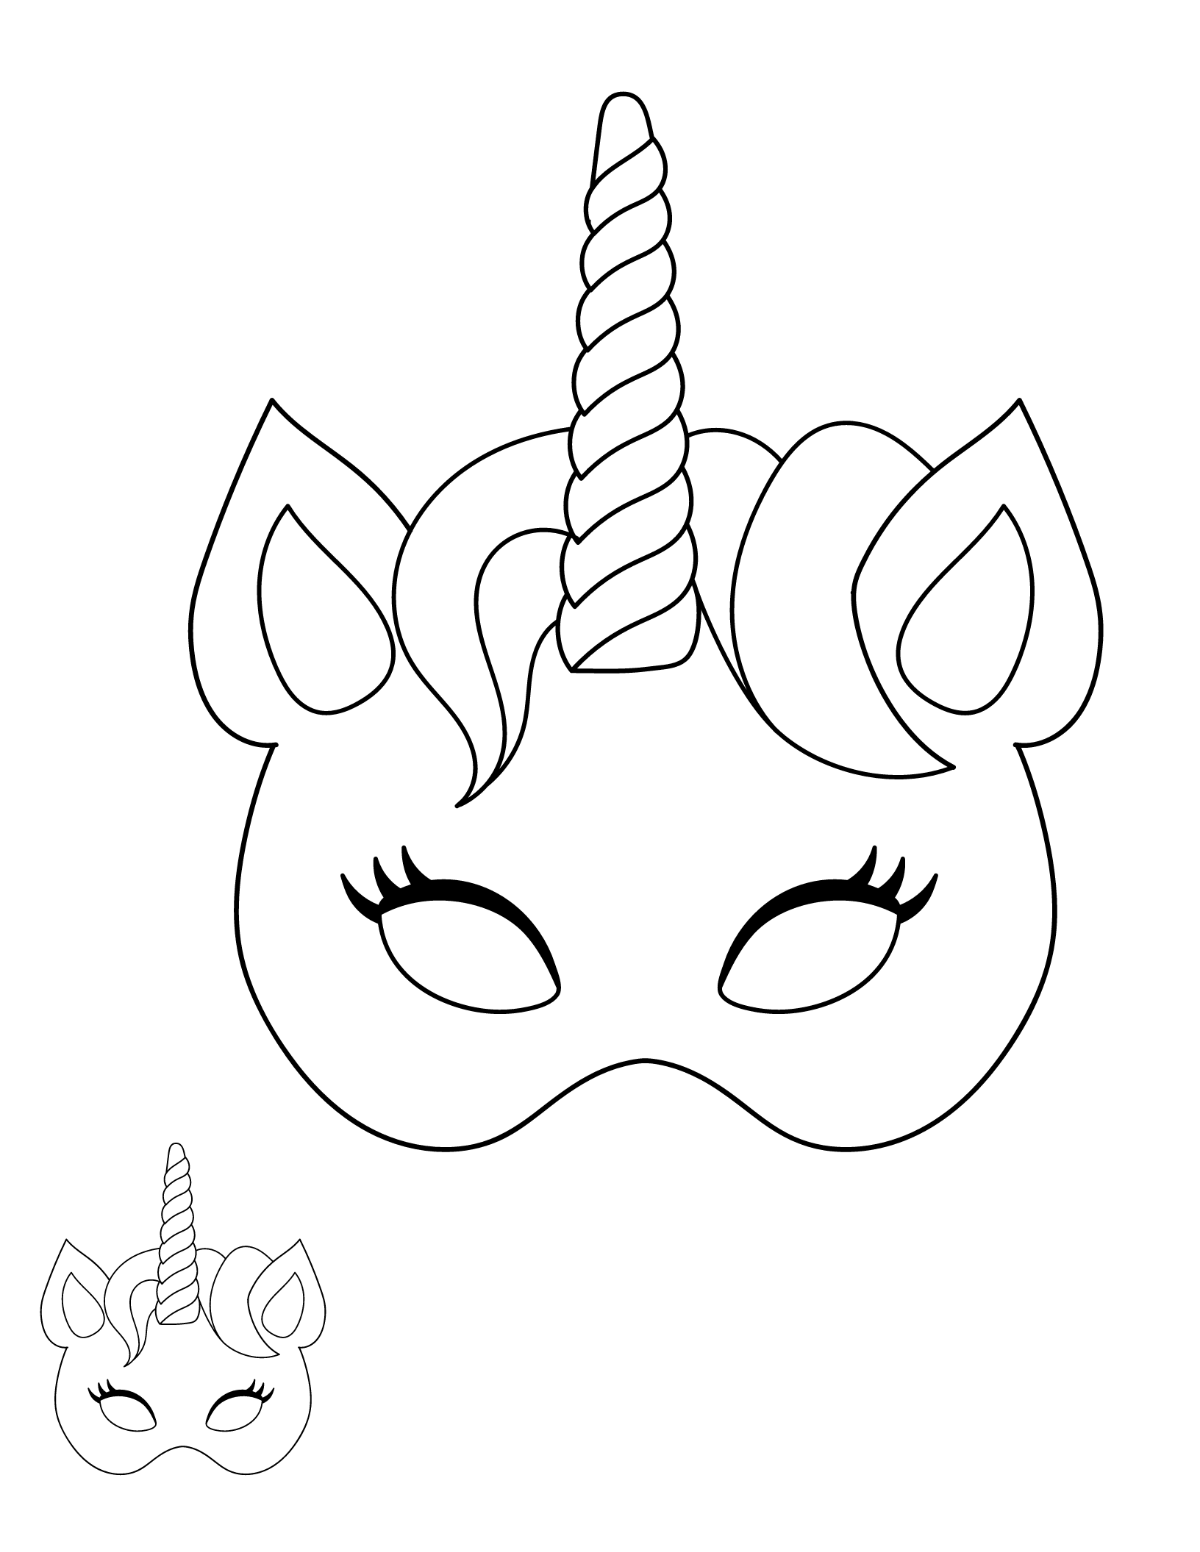 Unicorn Mask Coloring Page Template